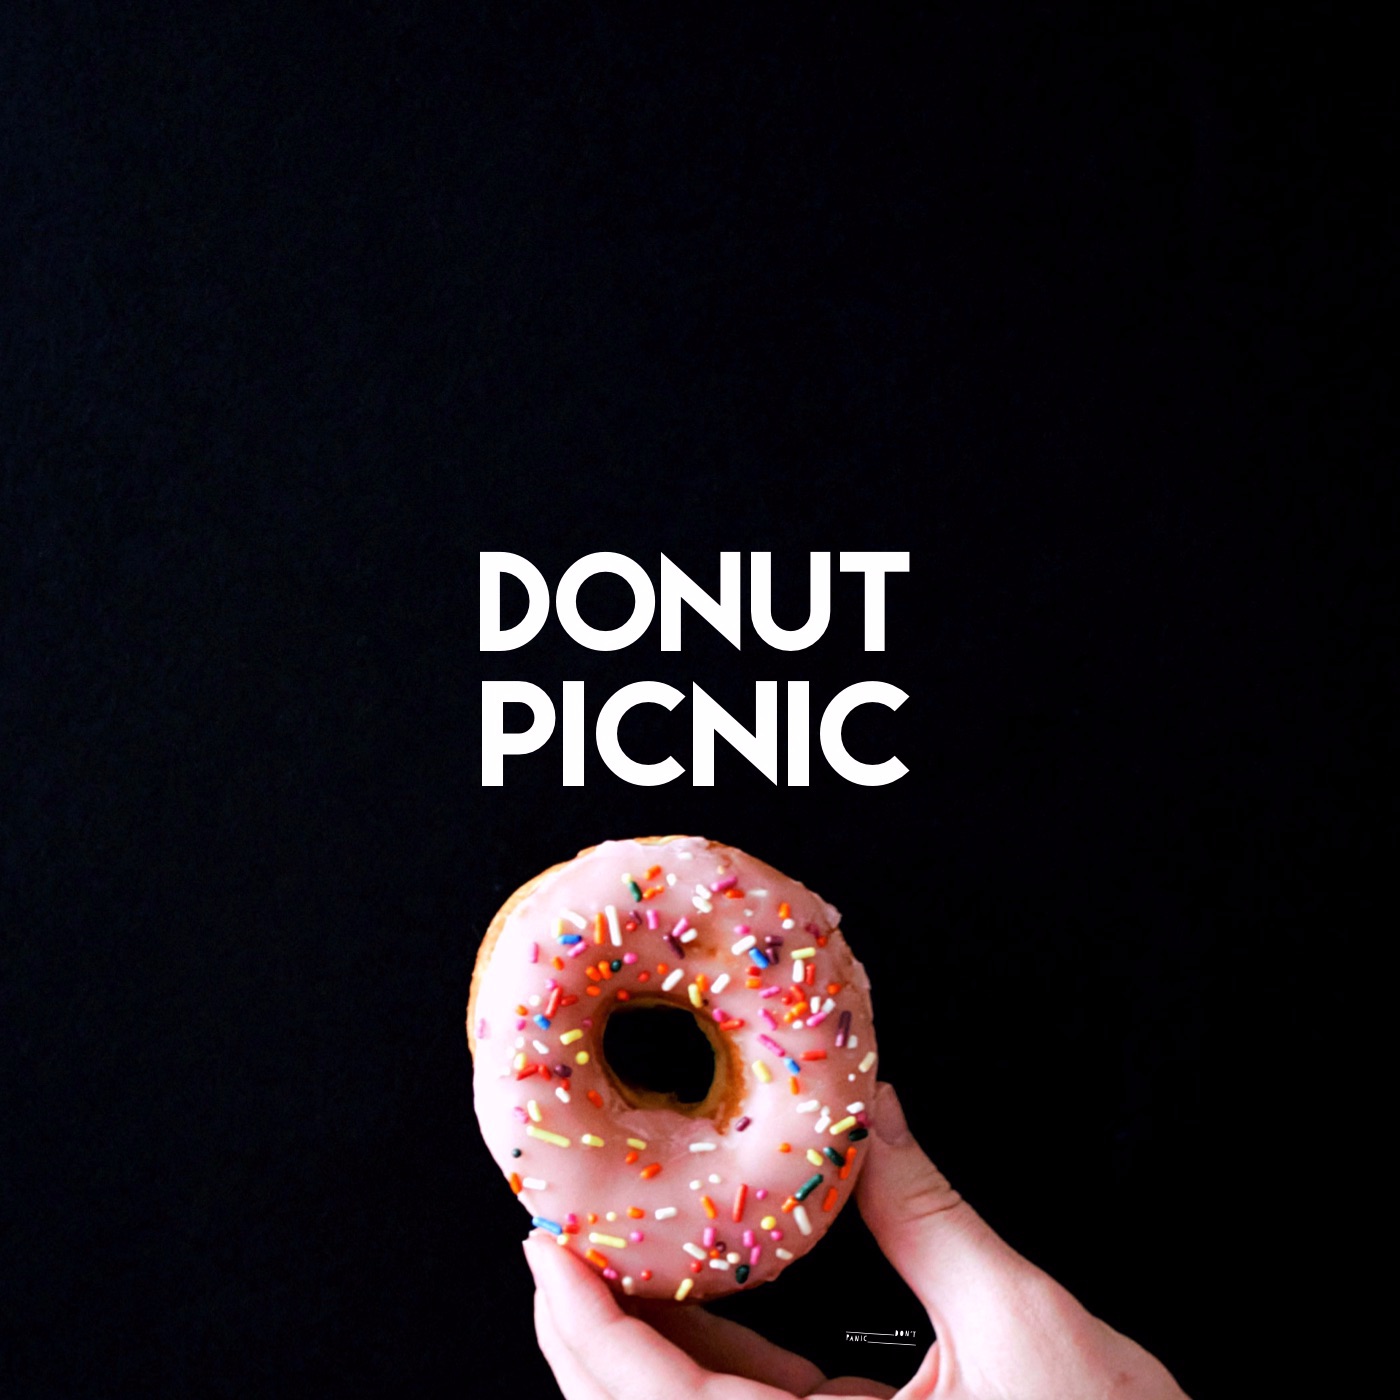 Donut Picnic: The Real Talk About Being The Boss